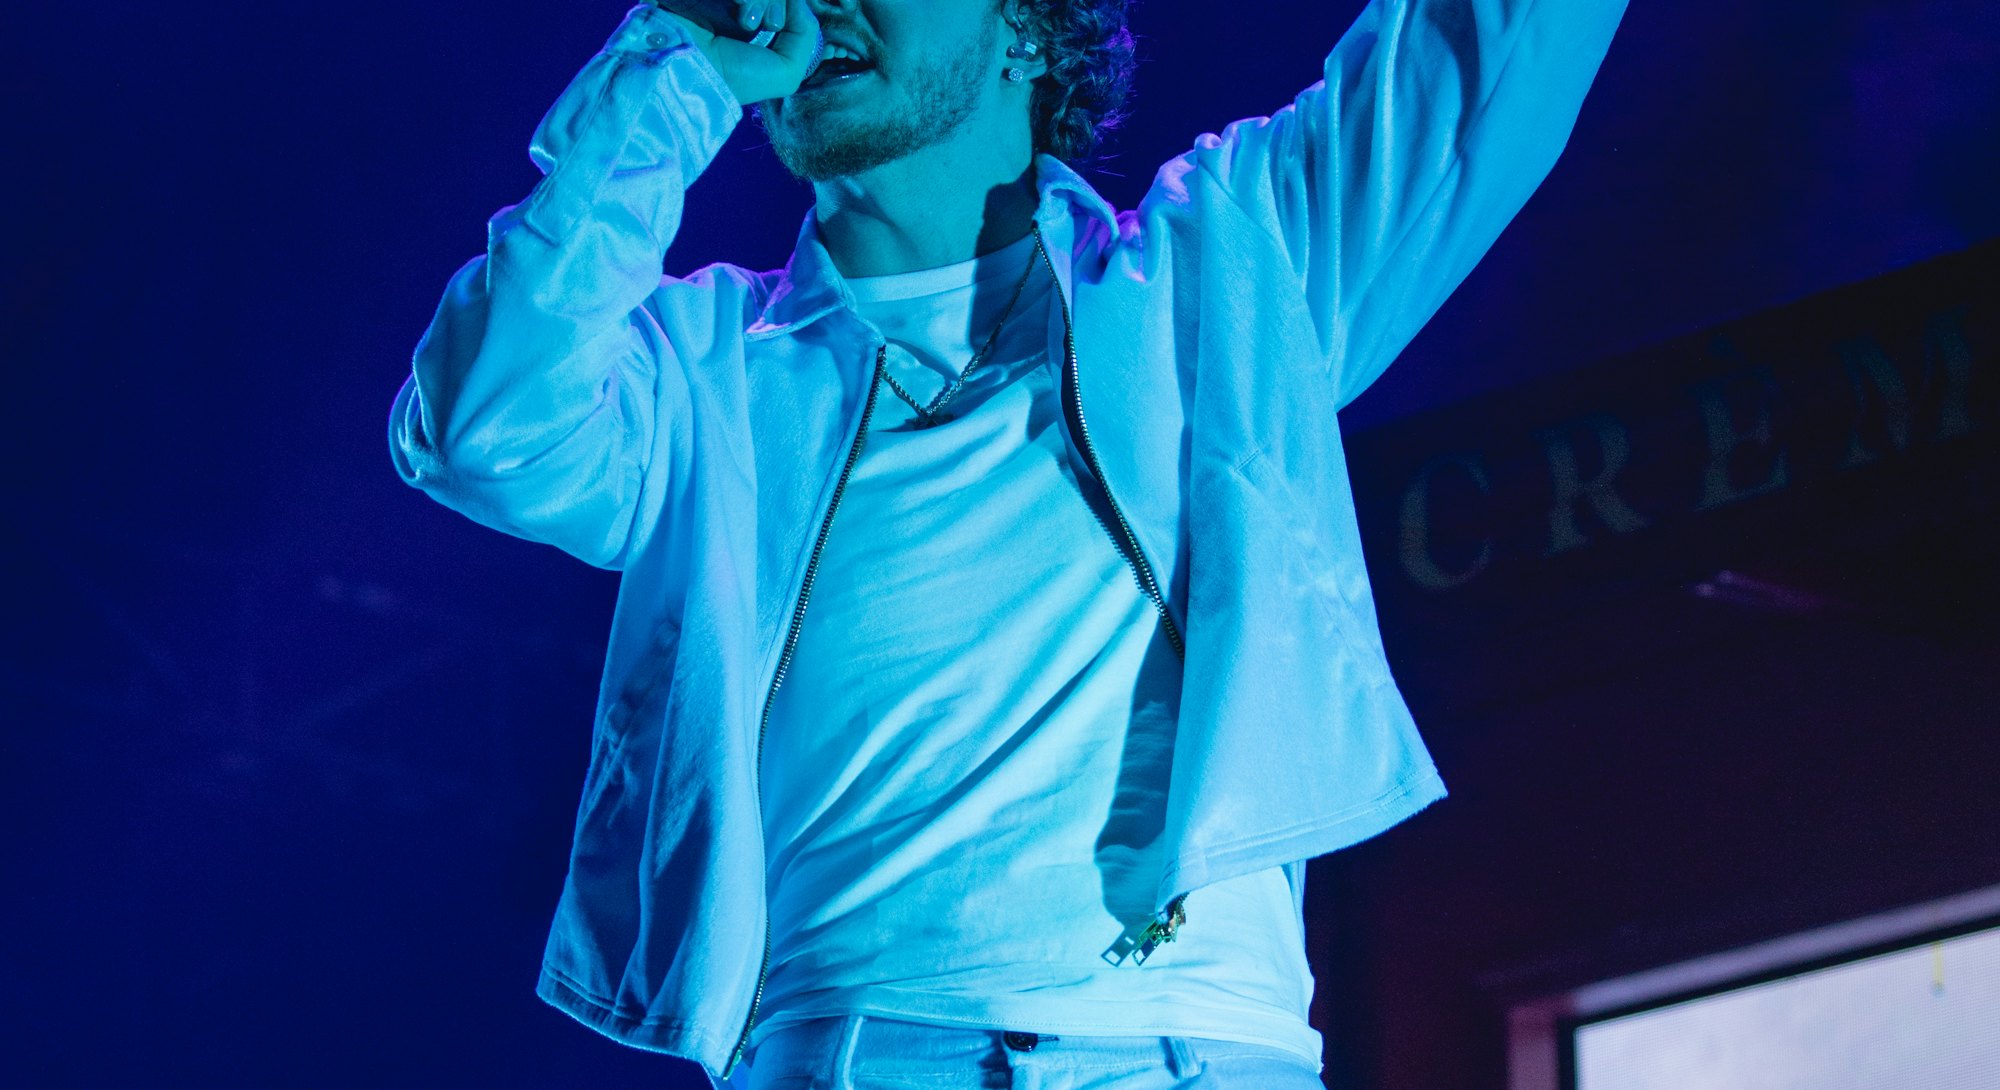 AUSTIN, TEXAS - OCTOBER 02: Rapper Jack Harlow performs onstage during weekend one, day two of Austi...